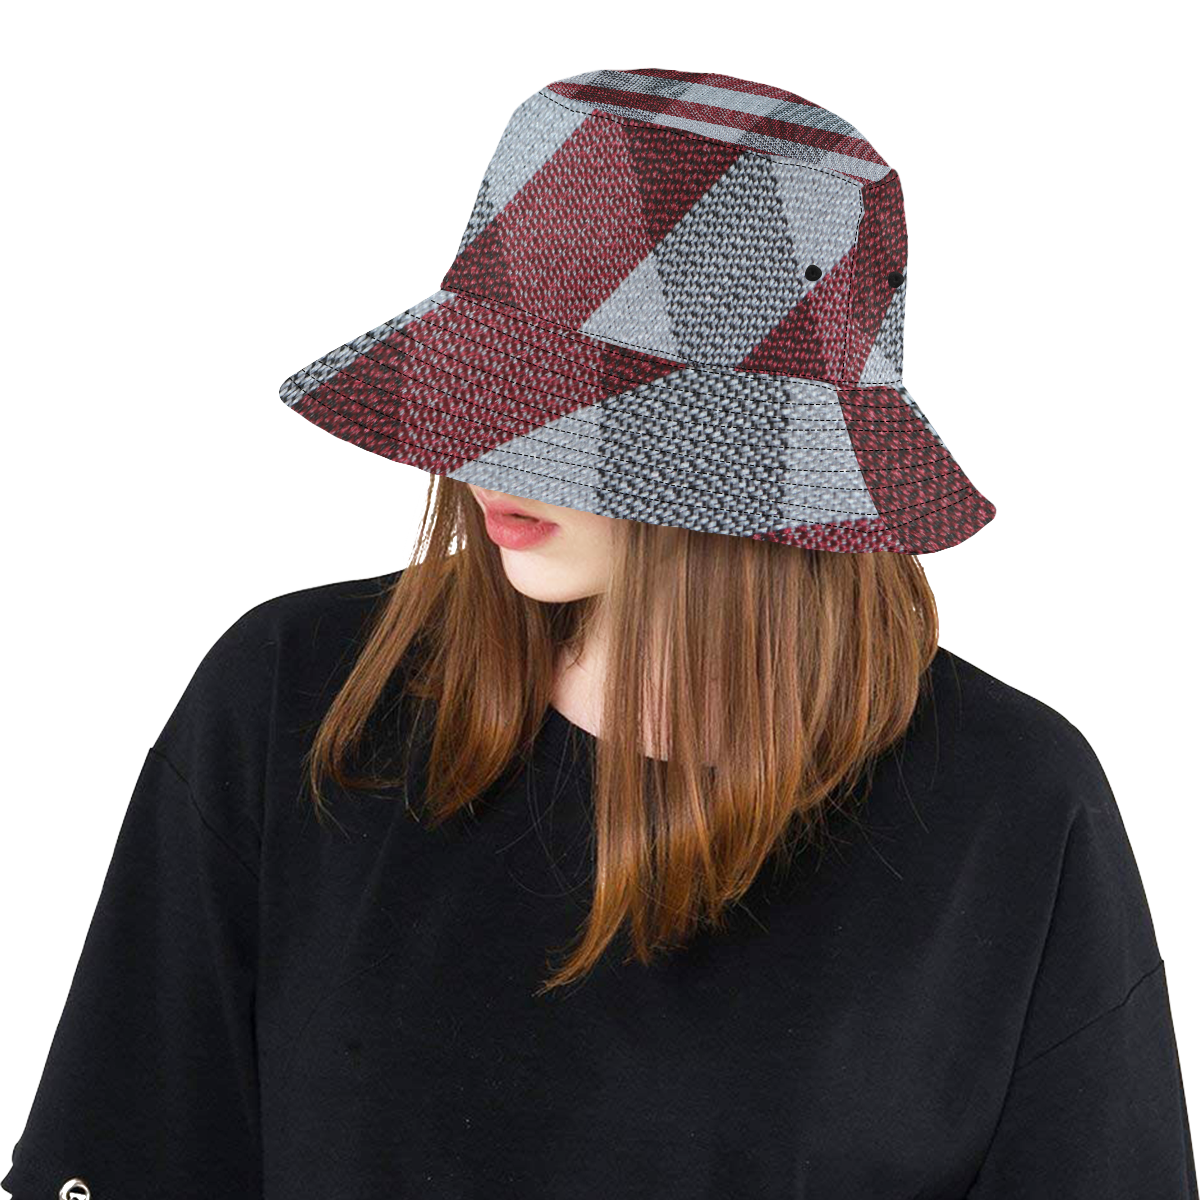 Red Grey Plaid All Over Print Bucket Hat